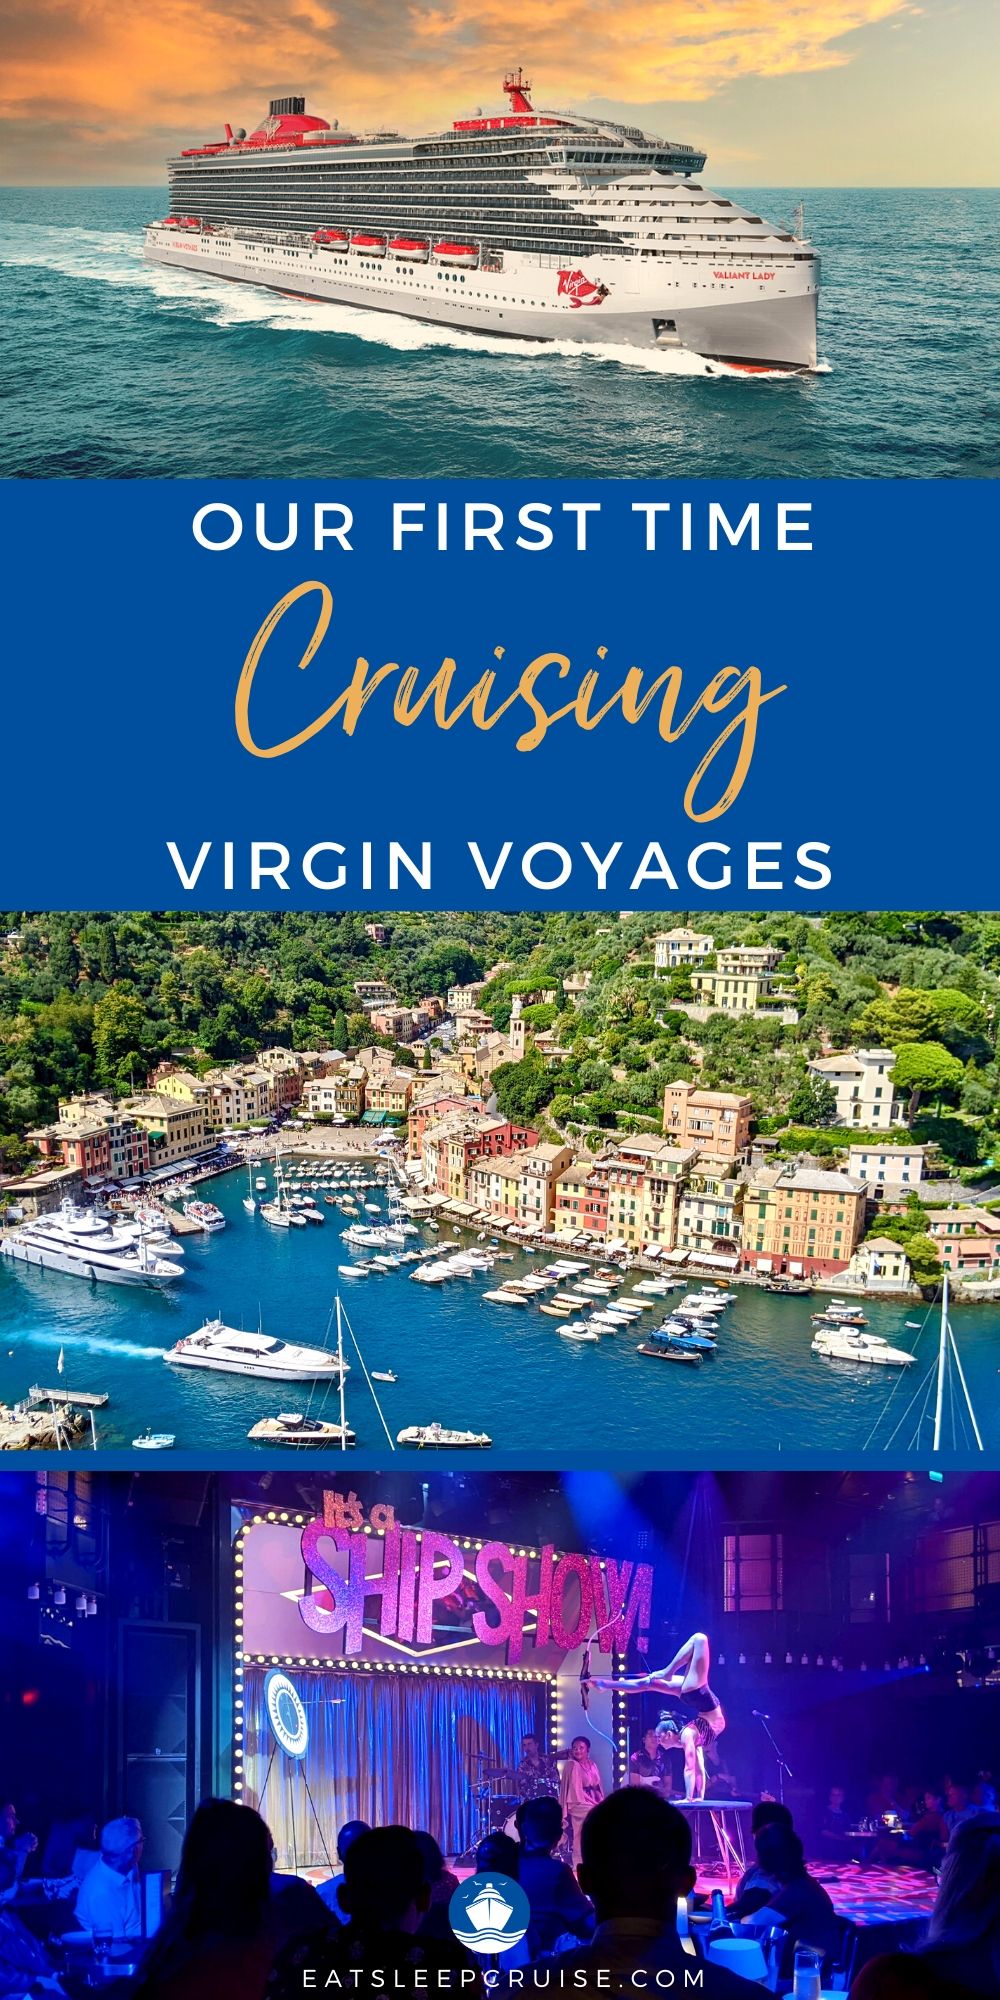 Our First Time Cruising Virgin Voyages